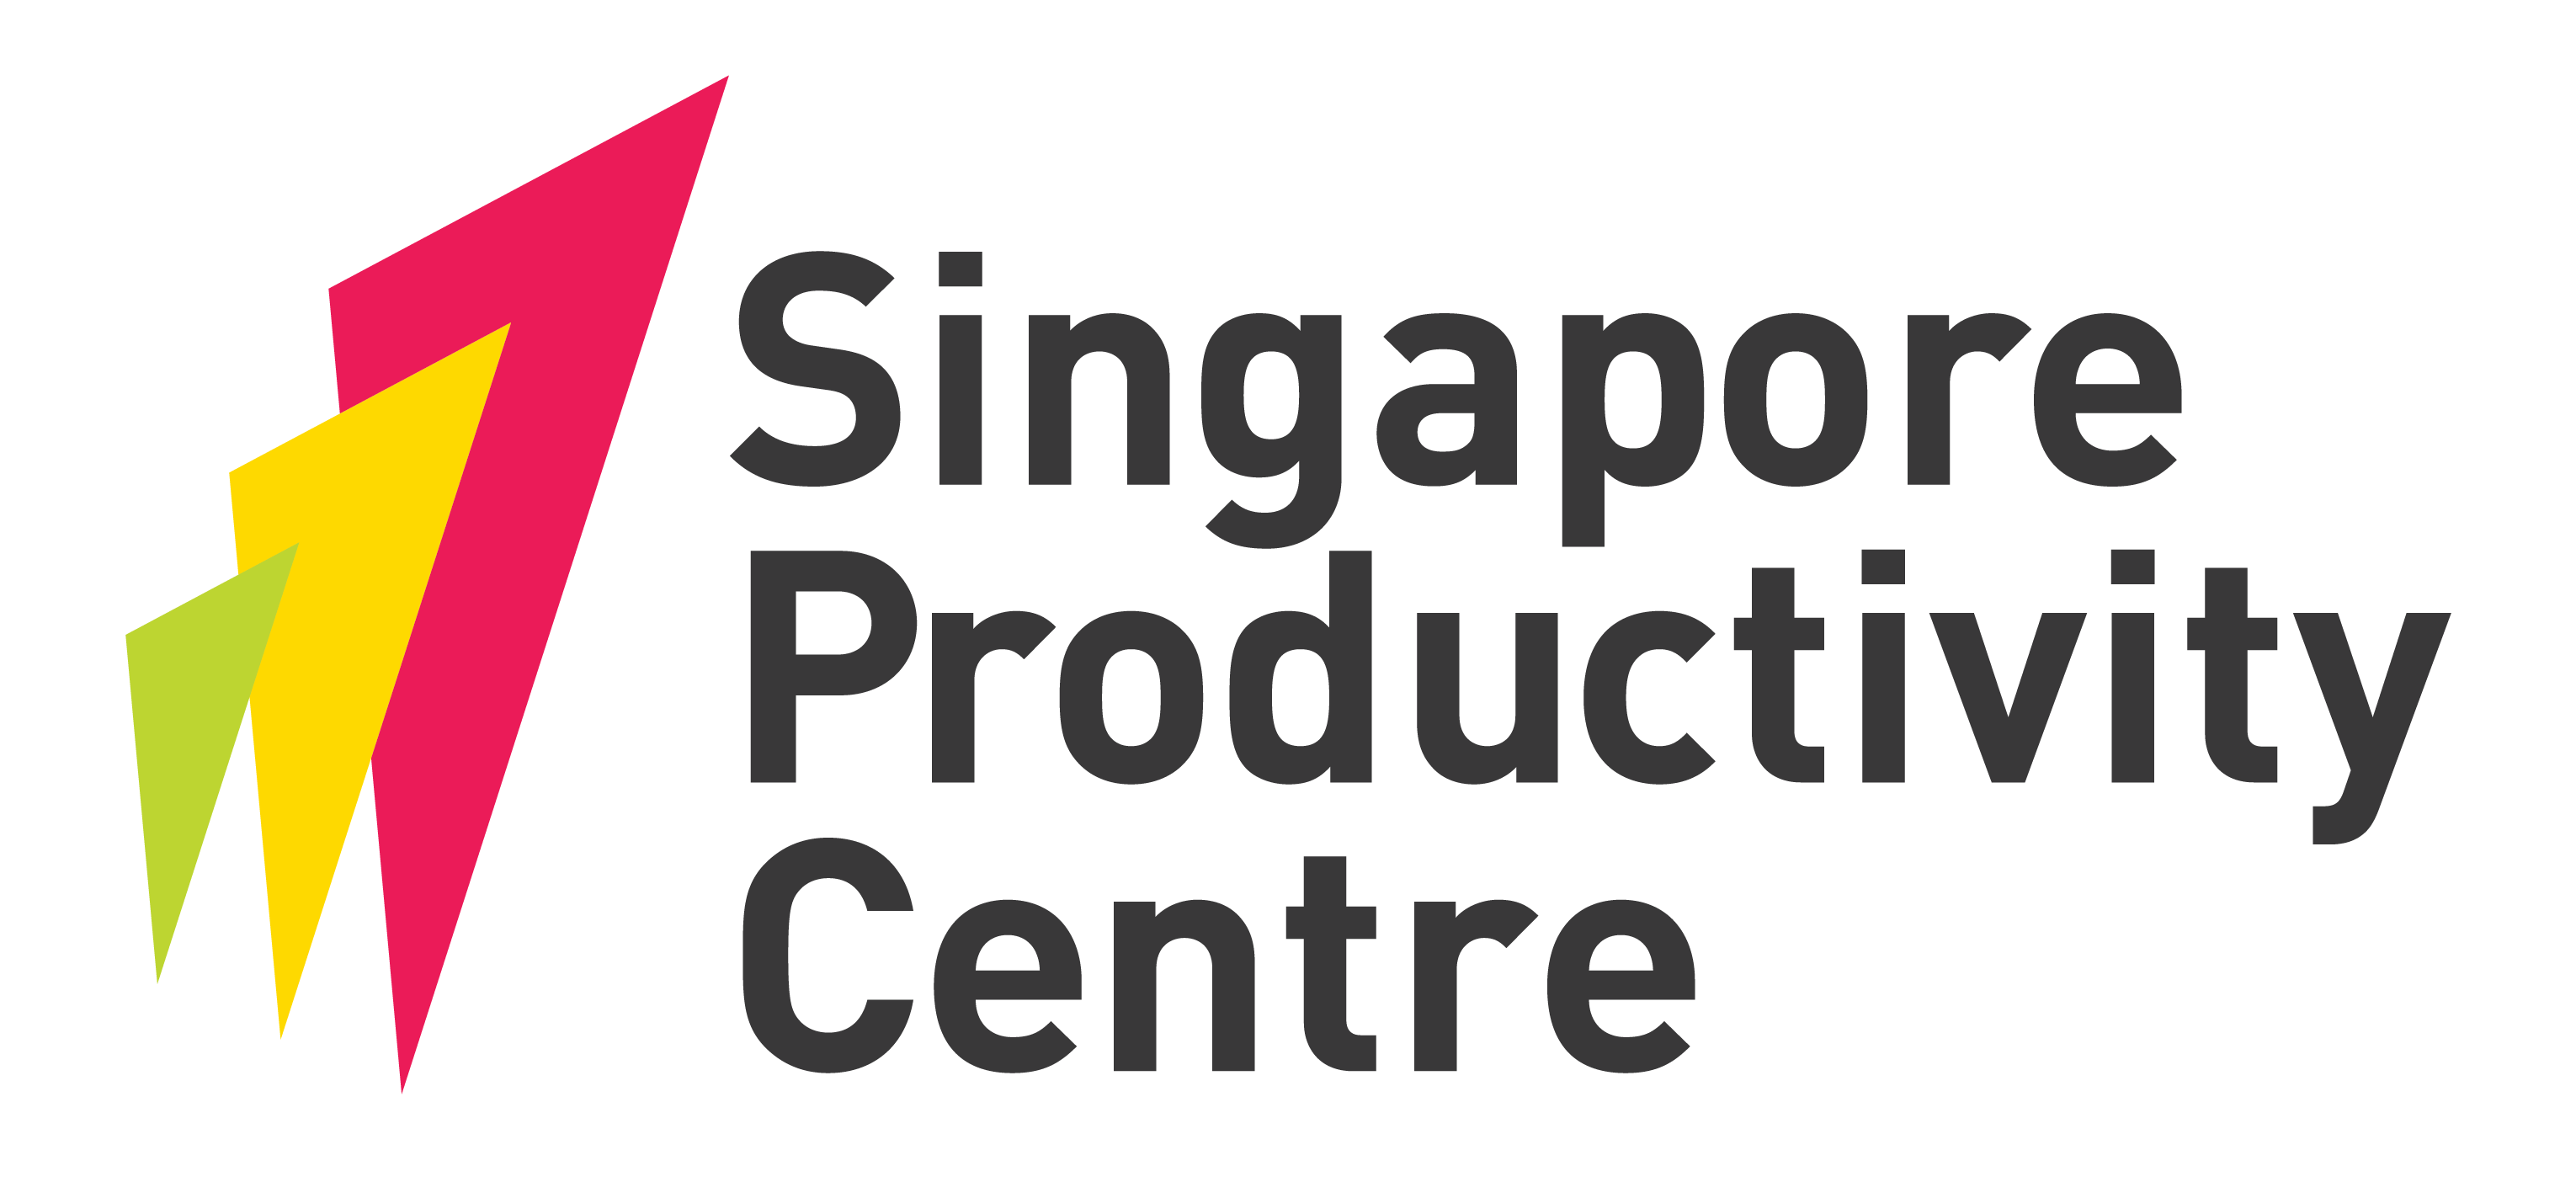 Food Productivity Specialist (FPS) Programme